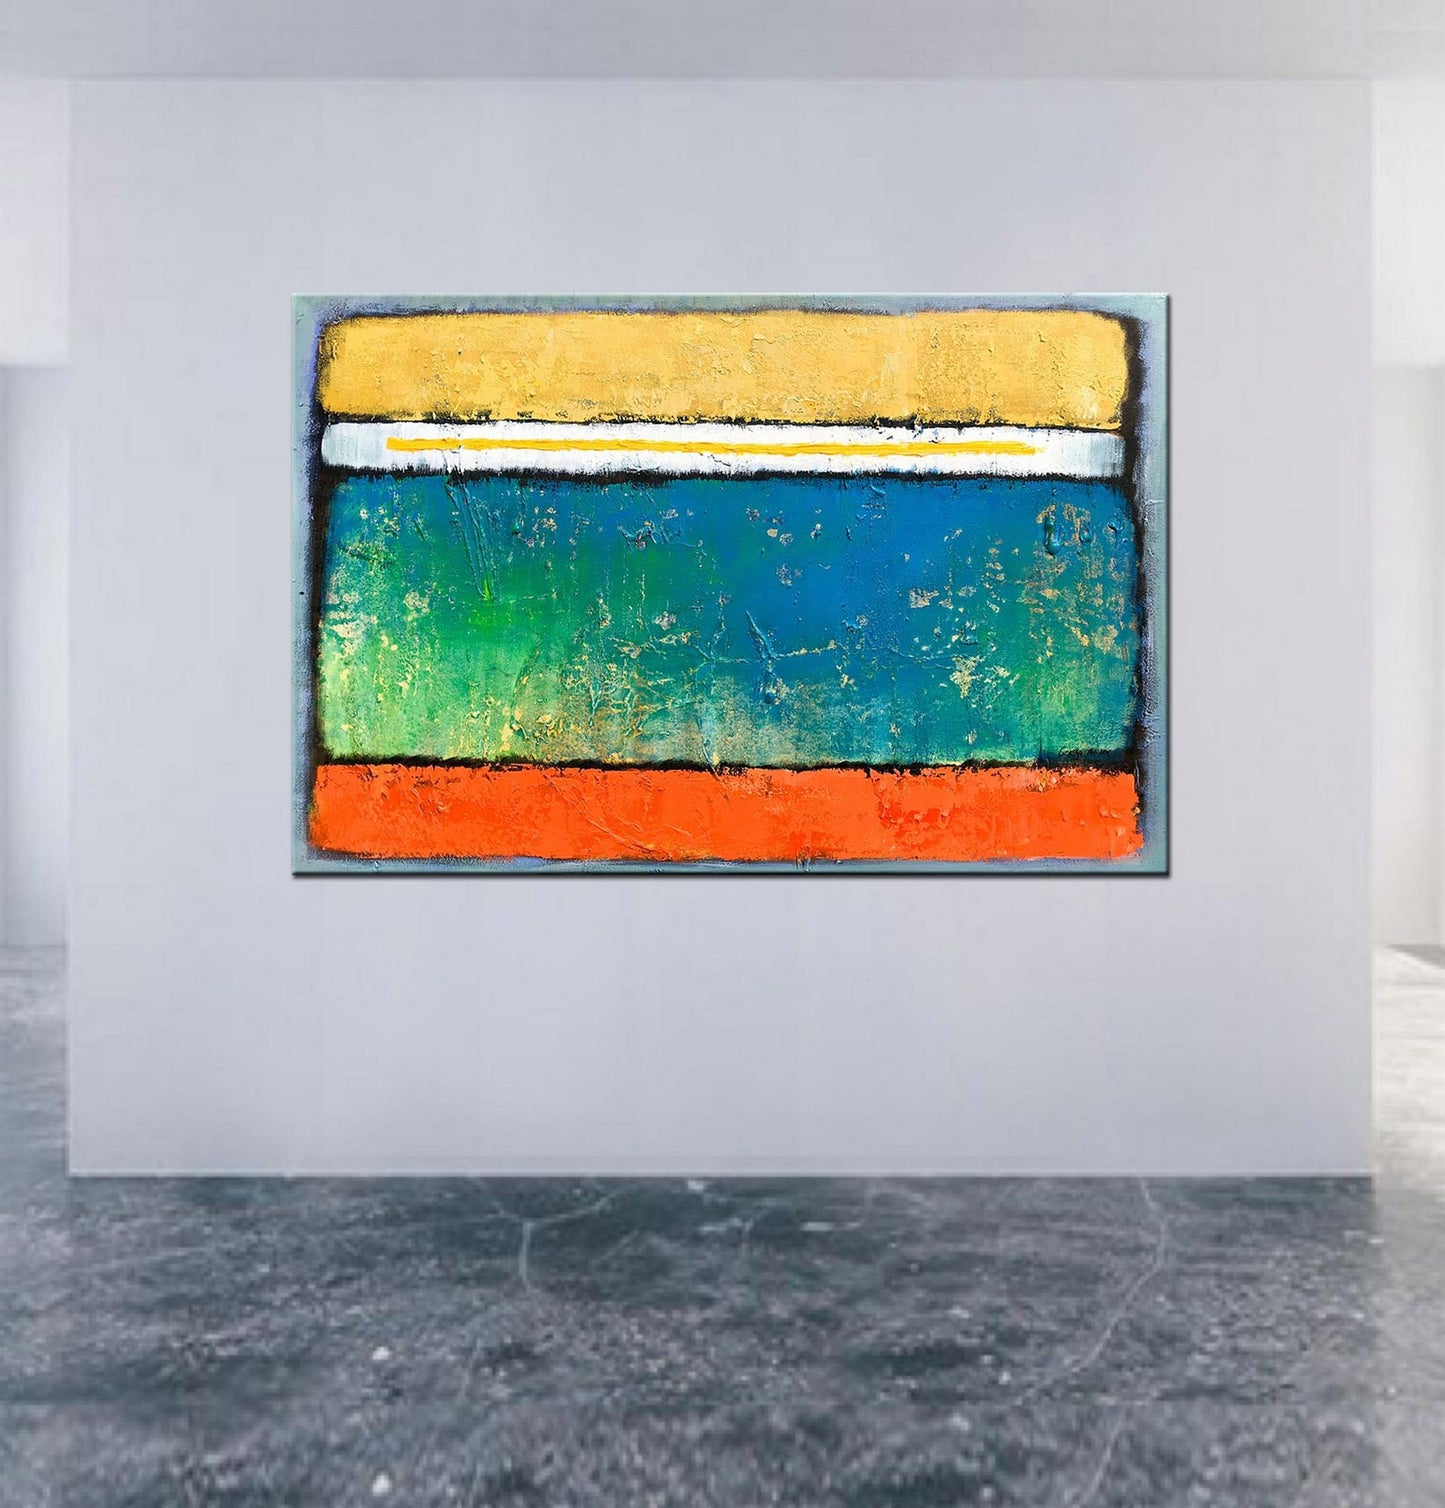 Oil Painting Abstract Green Yellow and Red, Large Canvas Art, Livingroom Wall Art, Wall Decor, Canvas Painting, Modern Art, Mark Rothko Art